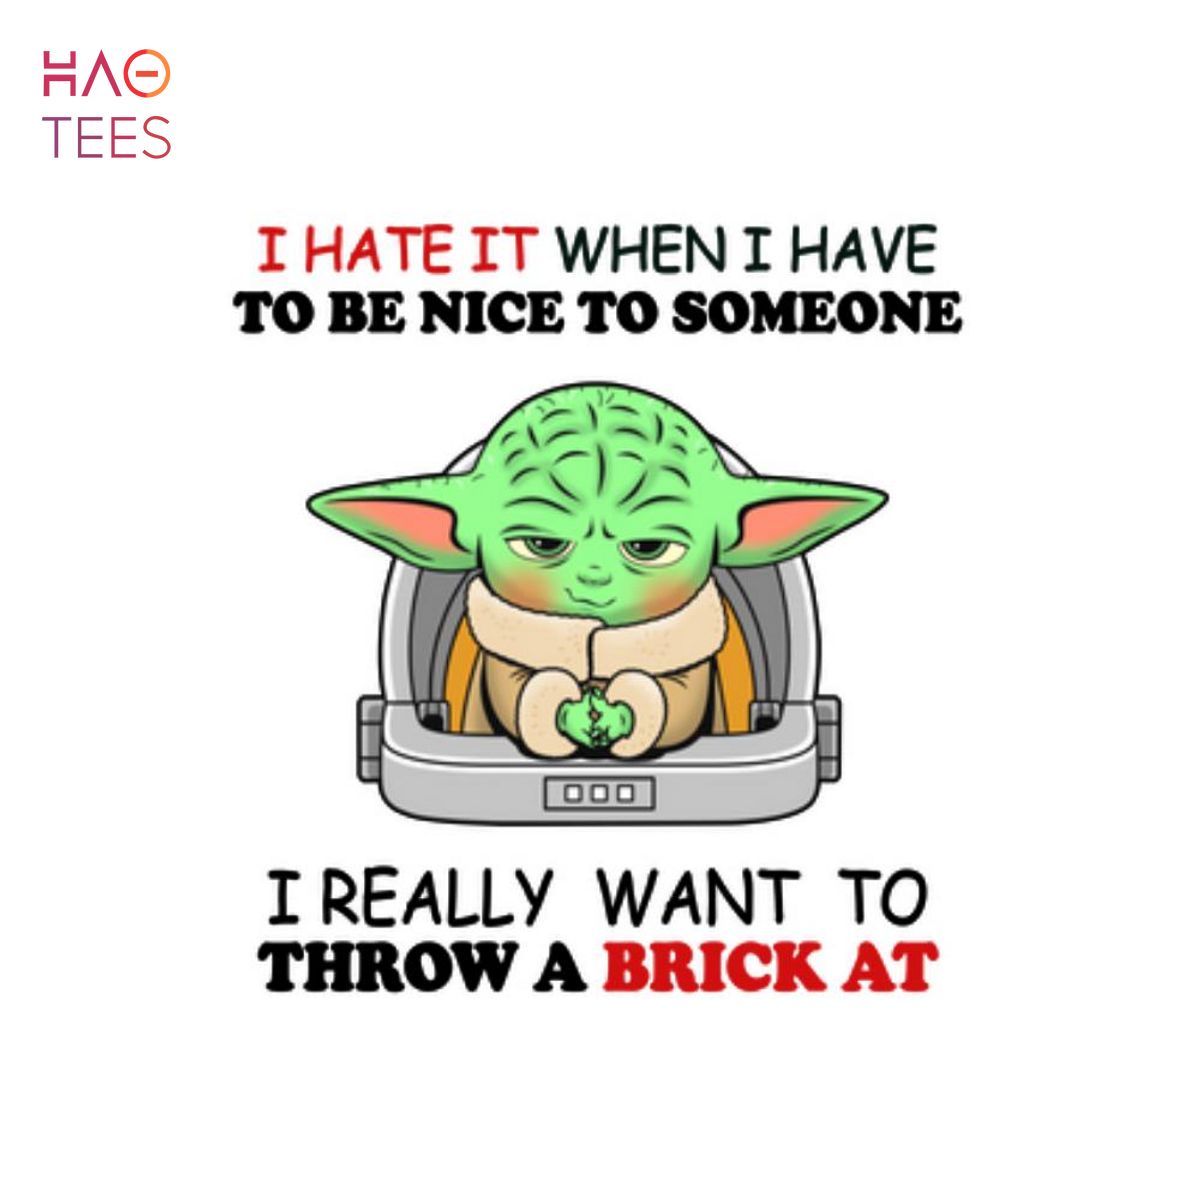 Baby Yoda I Hate It When I Have To Be Nice To Someone Mugs